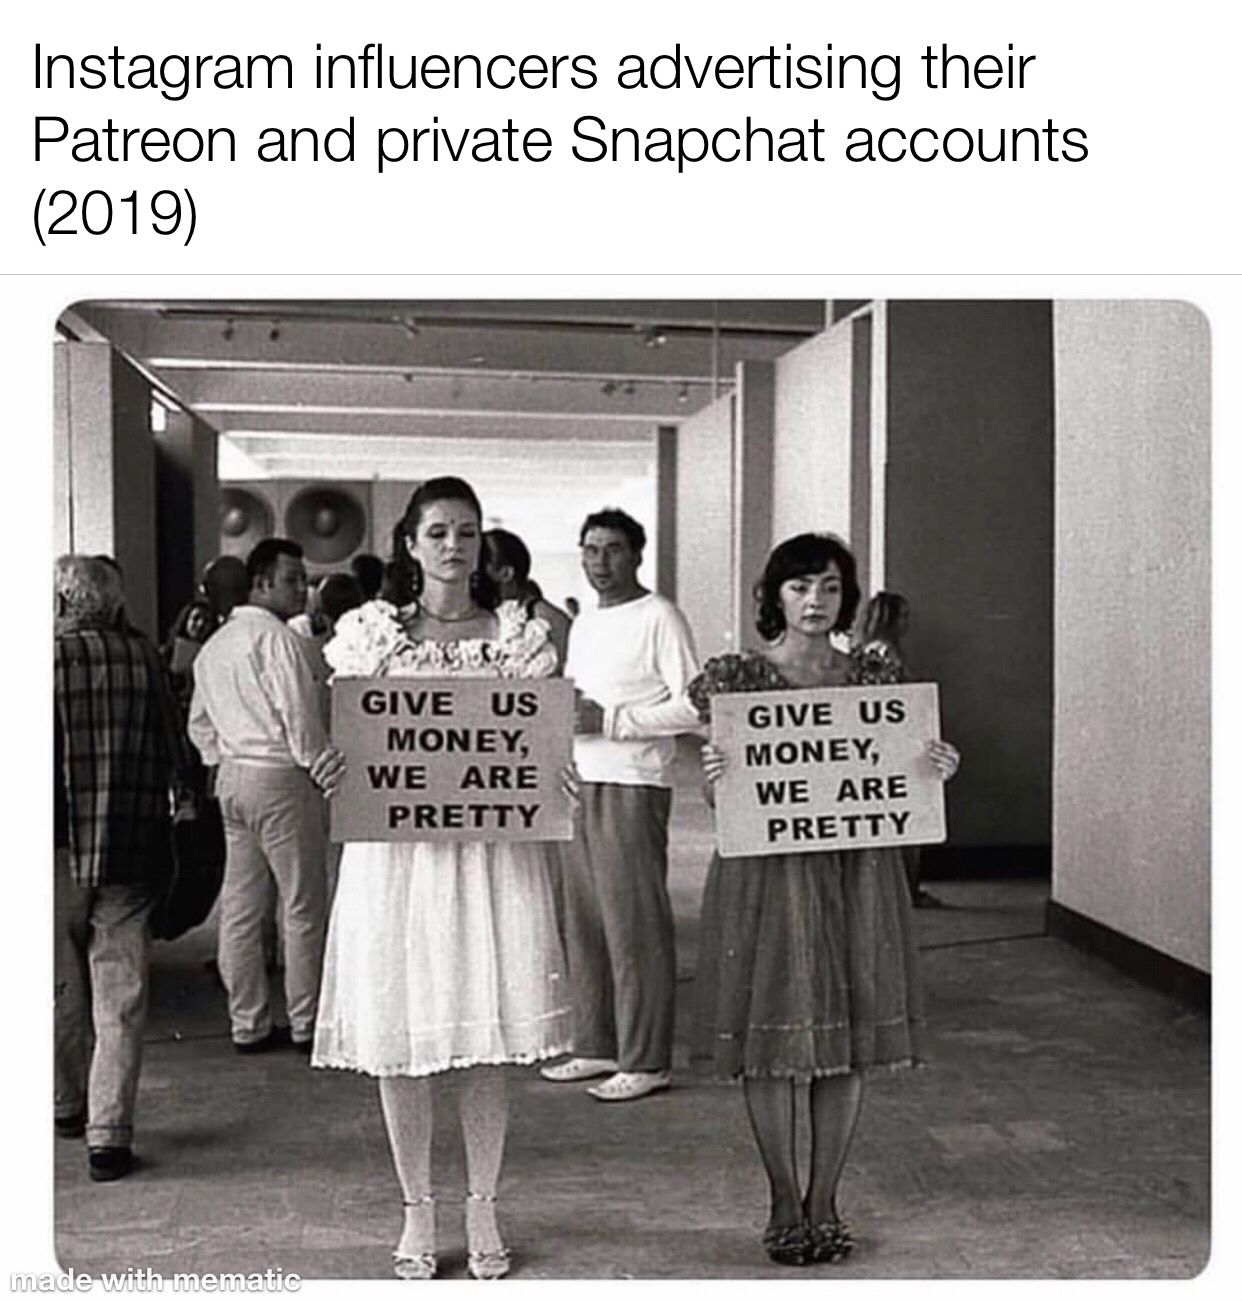 give us money we are pretty - Instagram influencers advertising their Patreon and private Snapchat accounts 2019 Give Us Money, We Are Pretty Give Us Money, We Are Pretty made with mematic